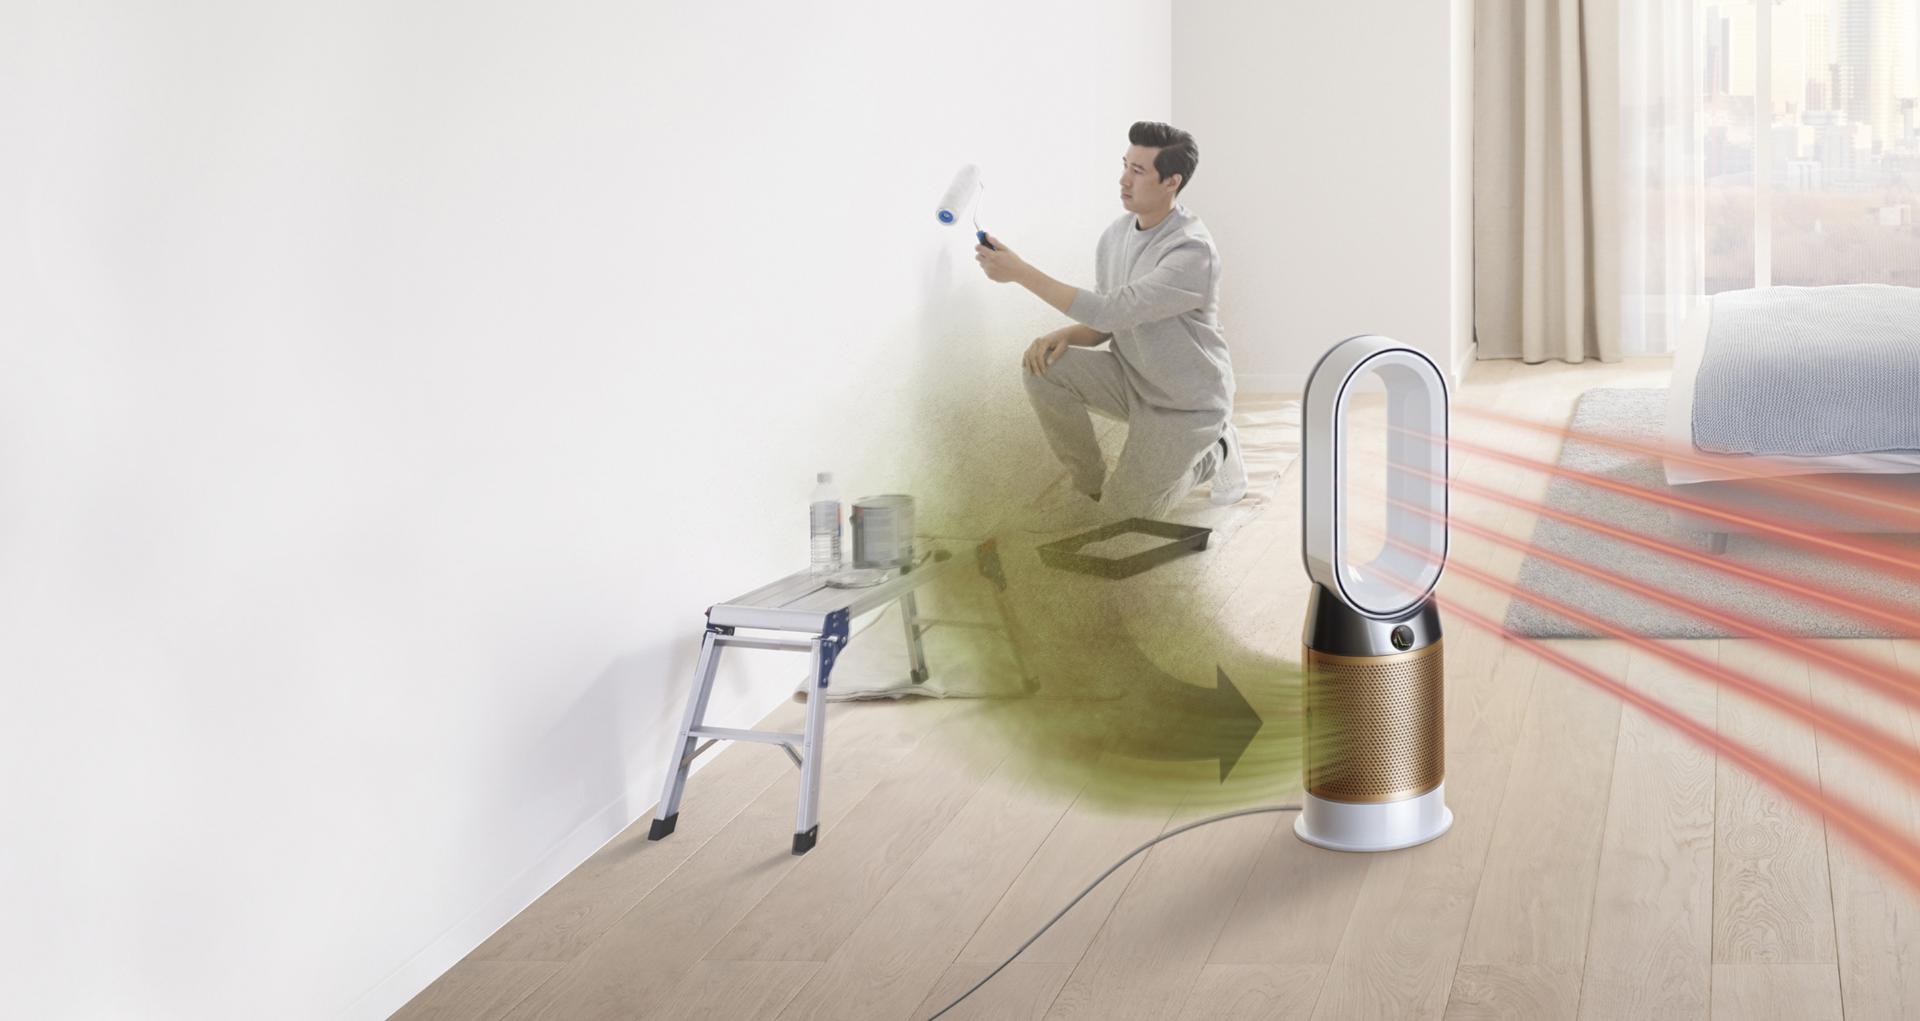 A man paints a room, while formaldehyde gas pollutes the air around him. The Dyson Pure Cryptomic purifier draws in the pollution and projects purified air.